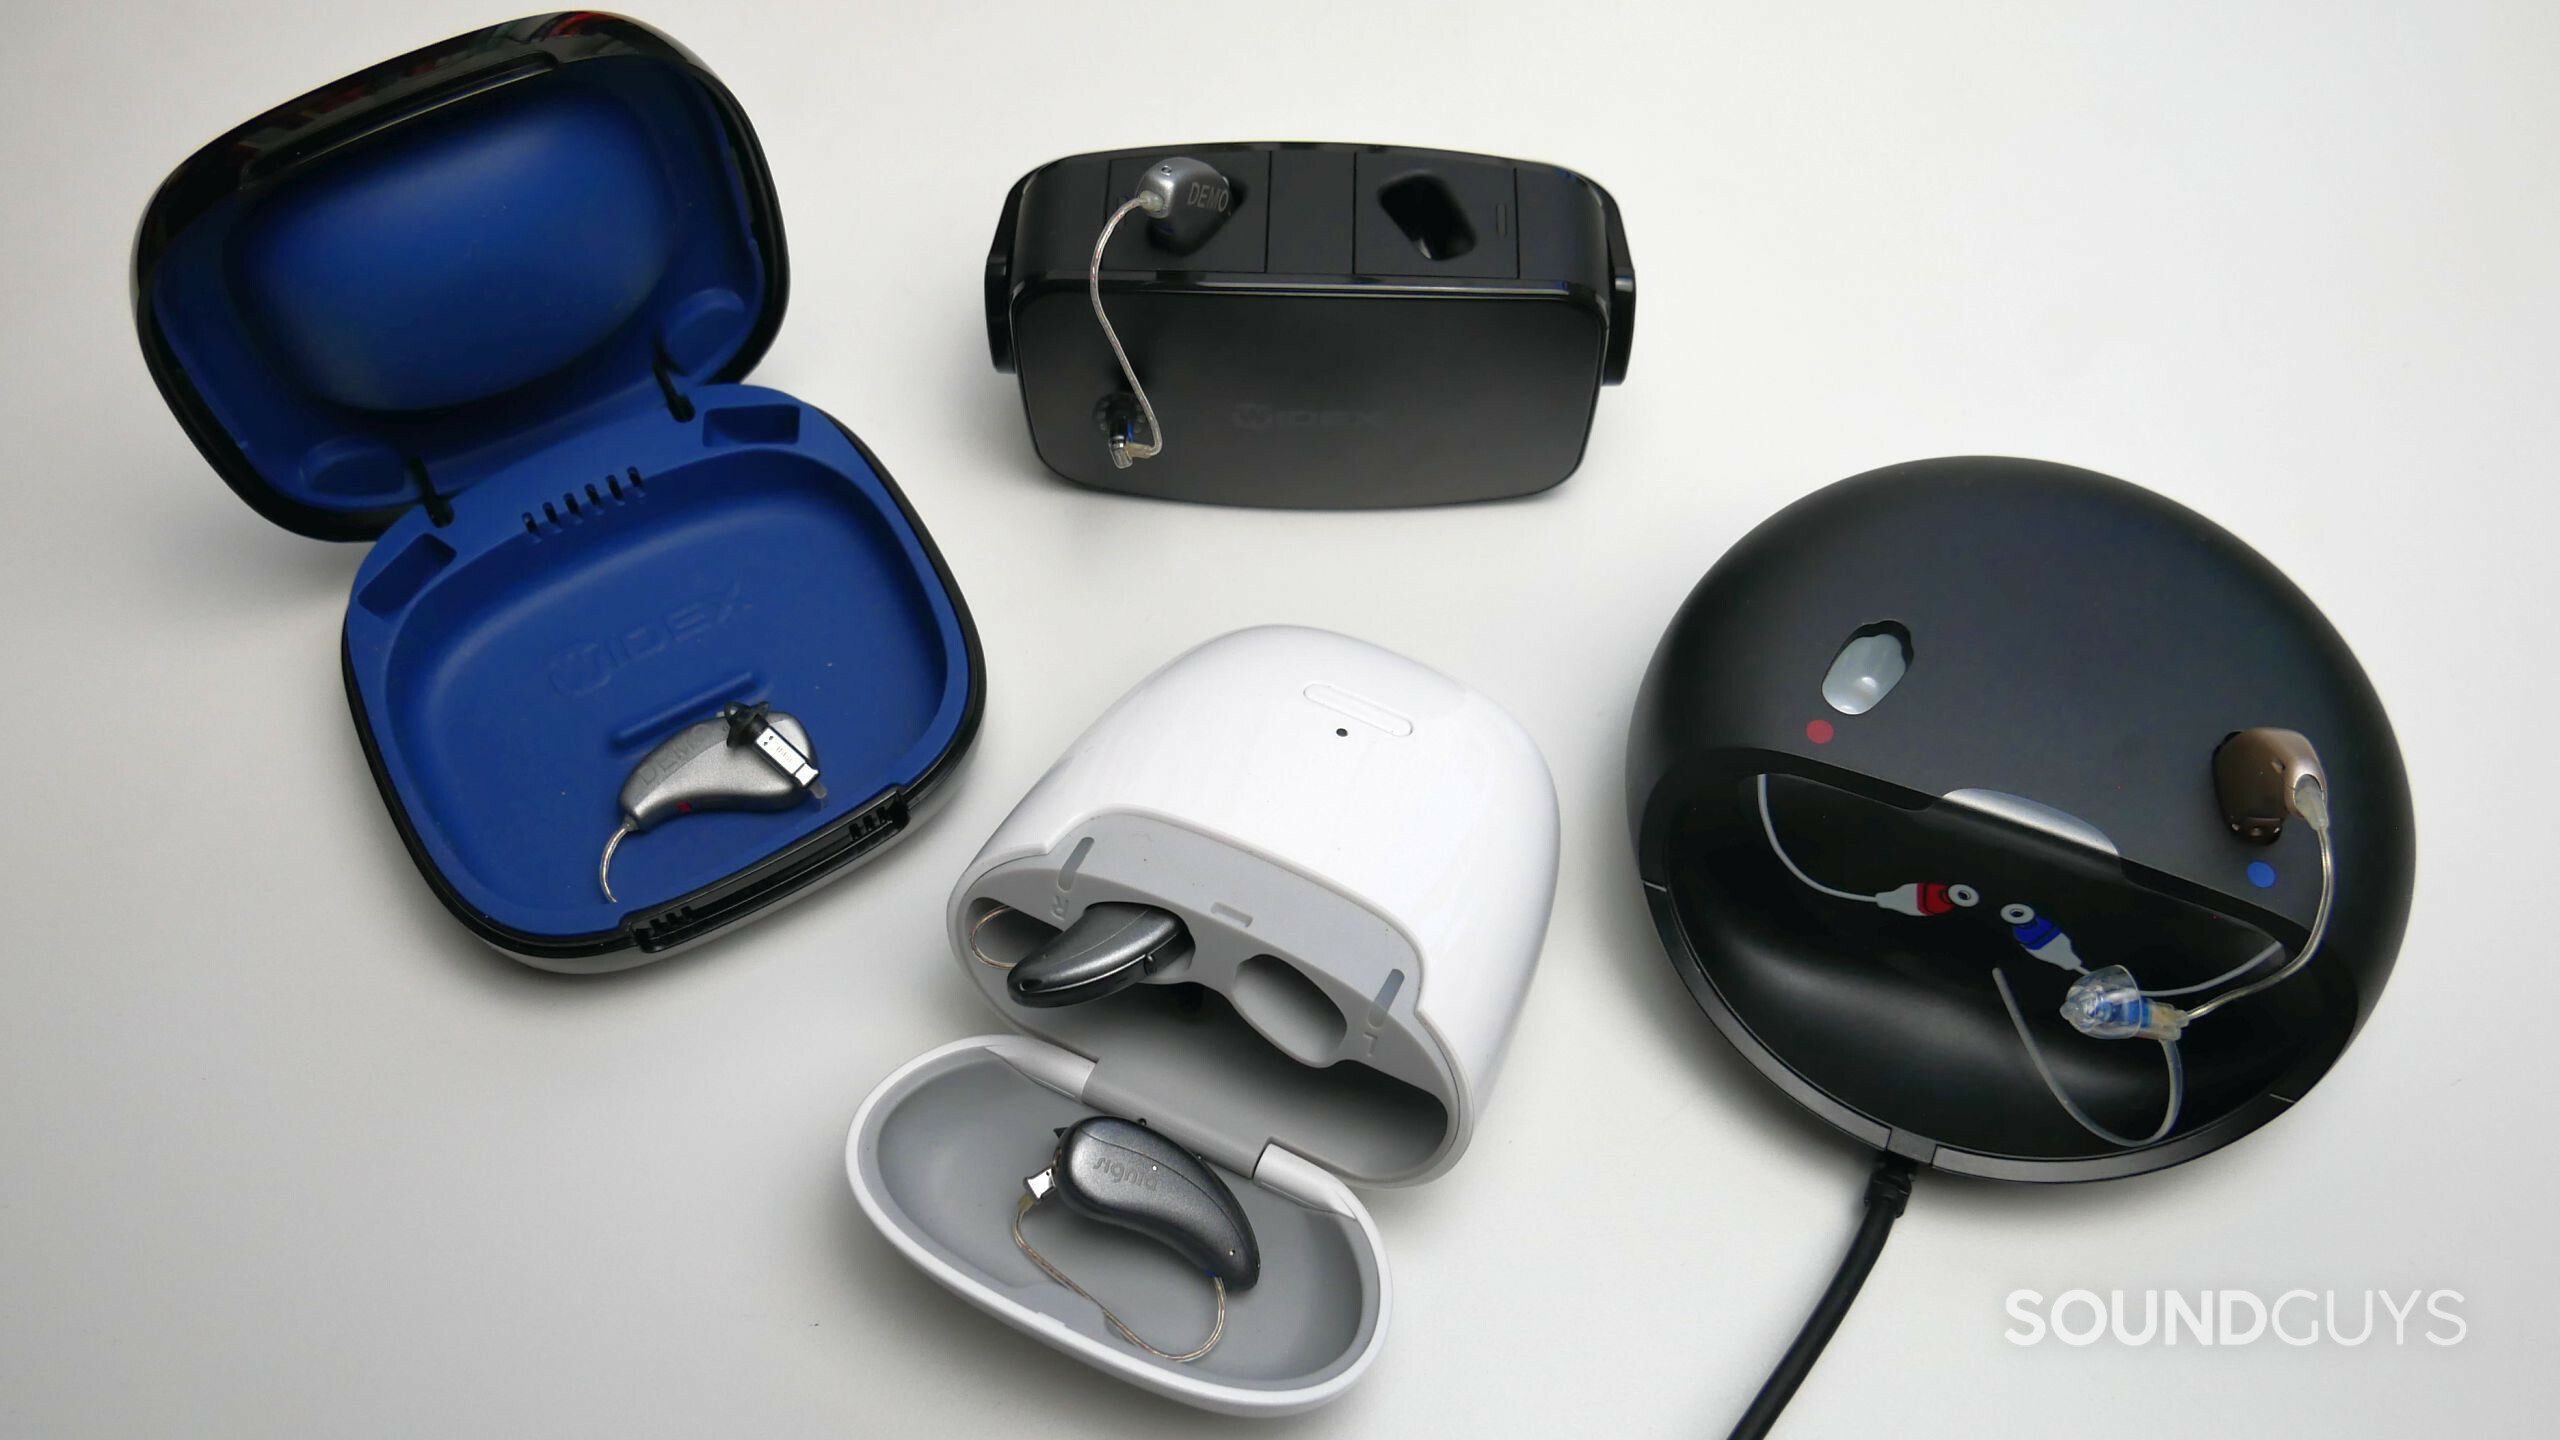 Different types of receiver-in-canal hearing aids by Signia, Widex. and Oticon.